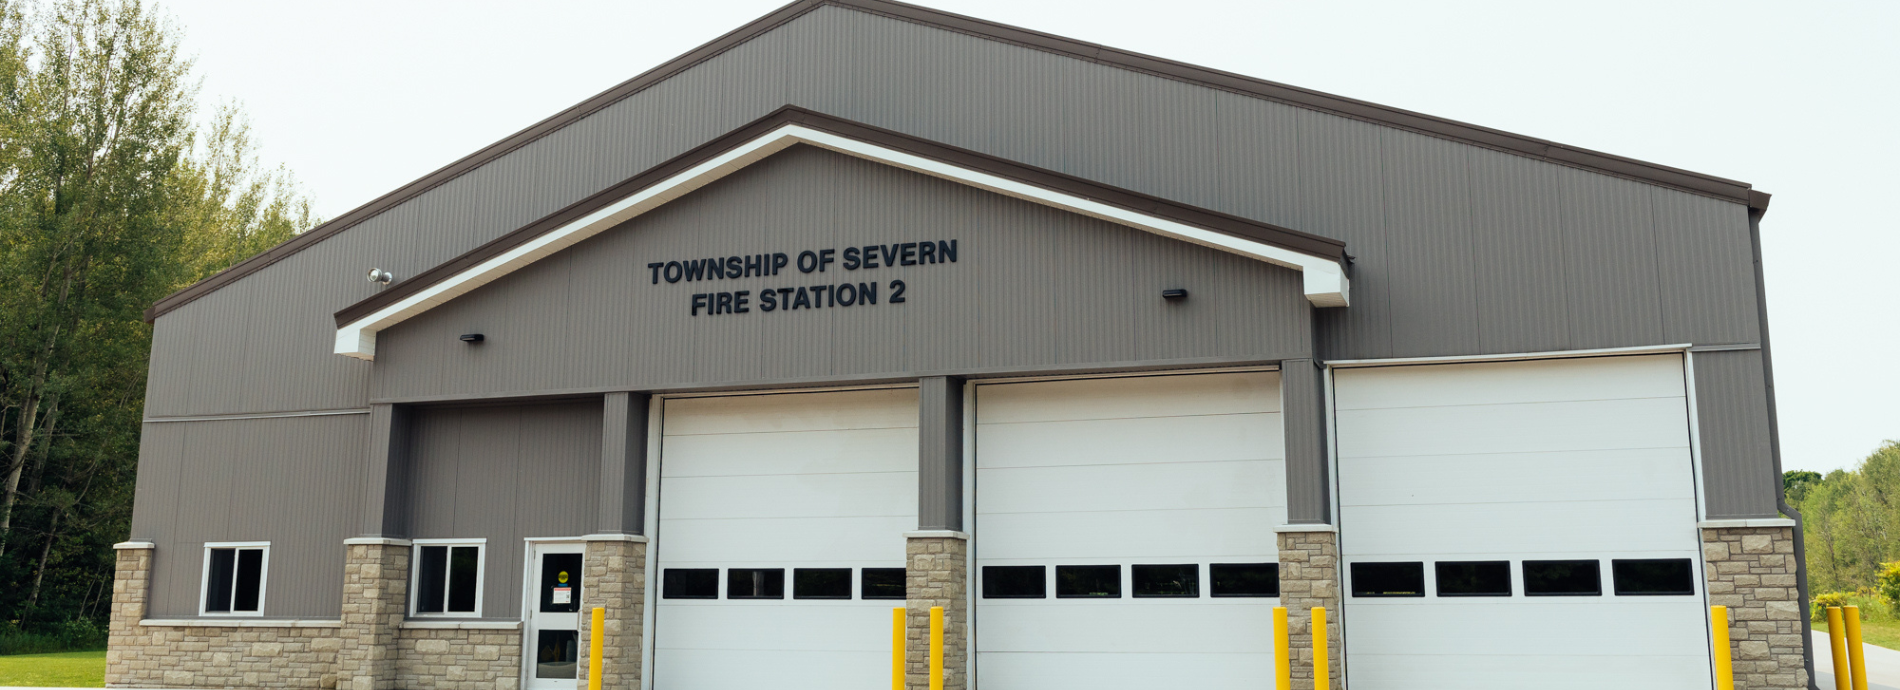 Fire and Emergency Services Station 2 in Severn